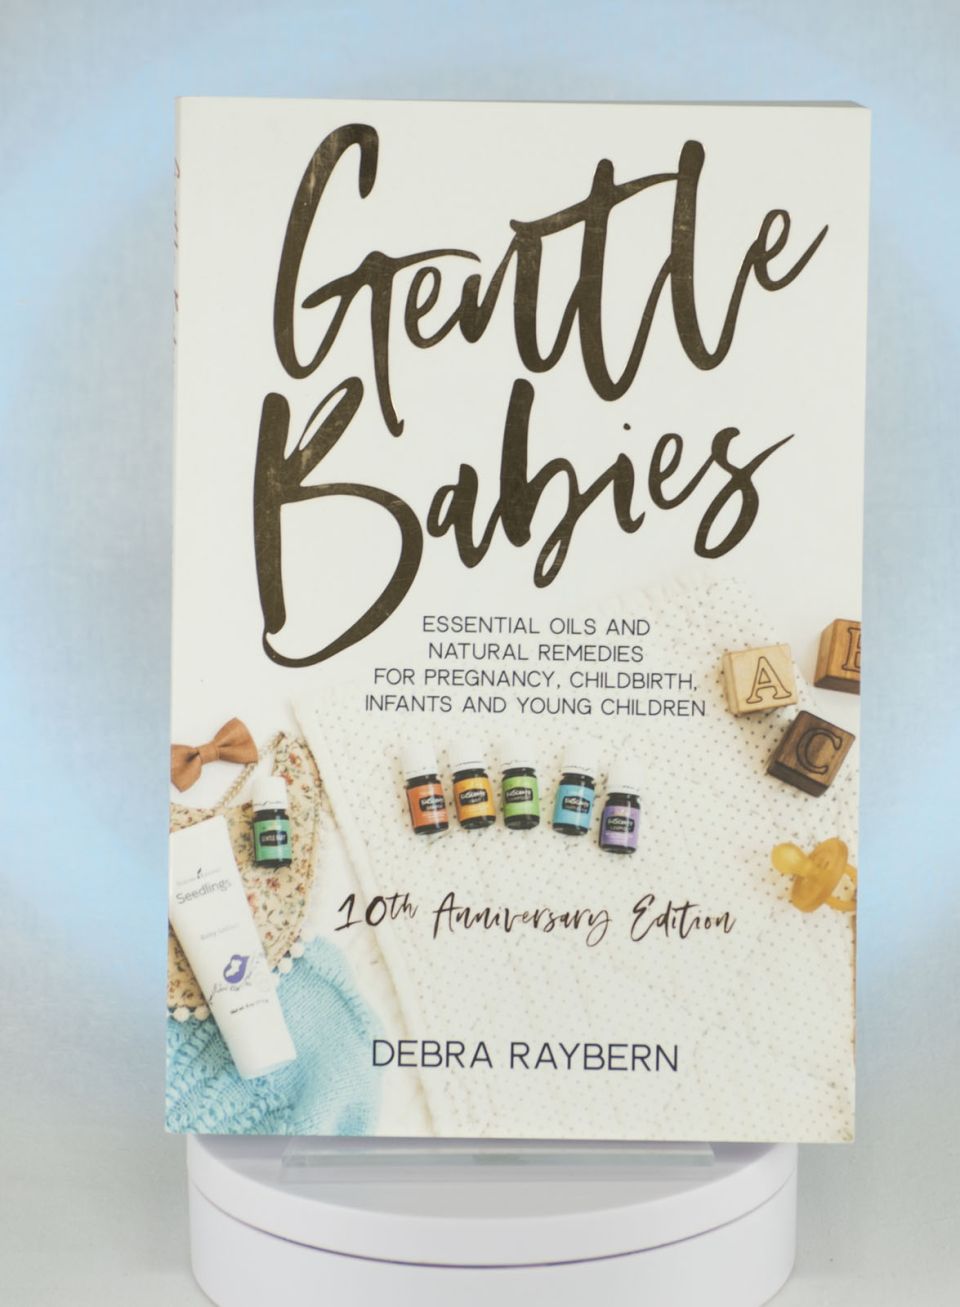 Gentle Babies: Essential Oils and Natural Remedies for Pregnancy, Childbirth, Infants and Young Children (10th Anniversary Edition)